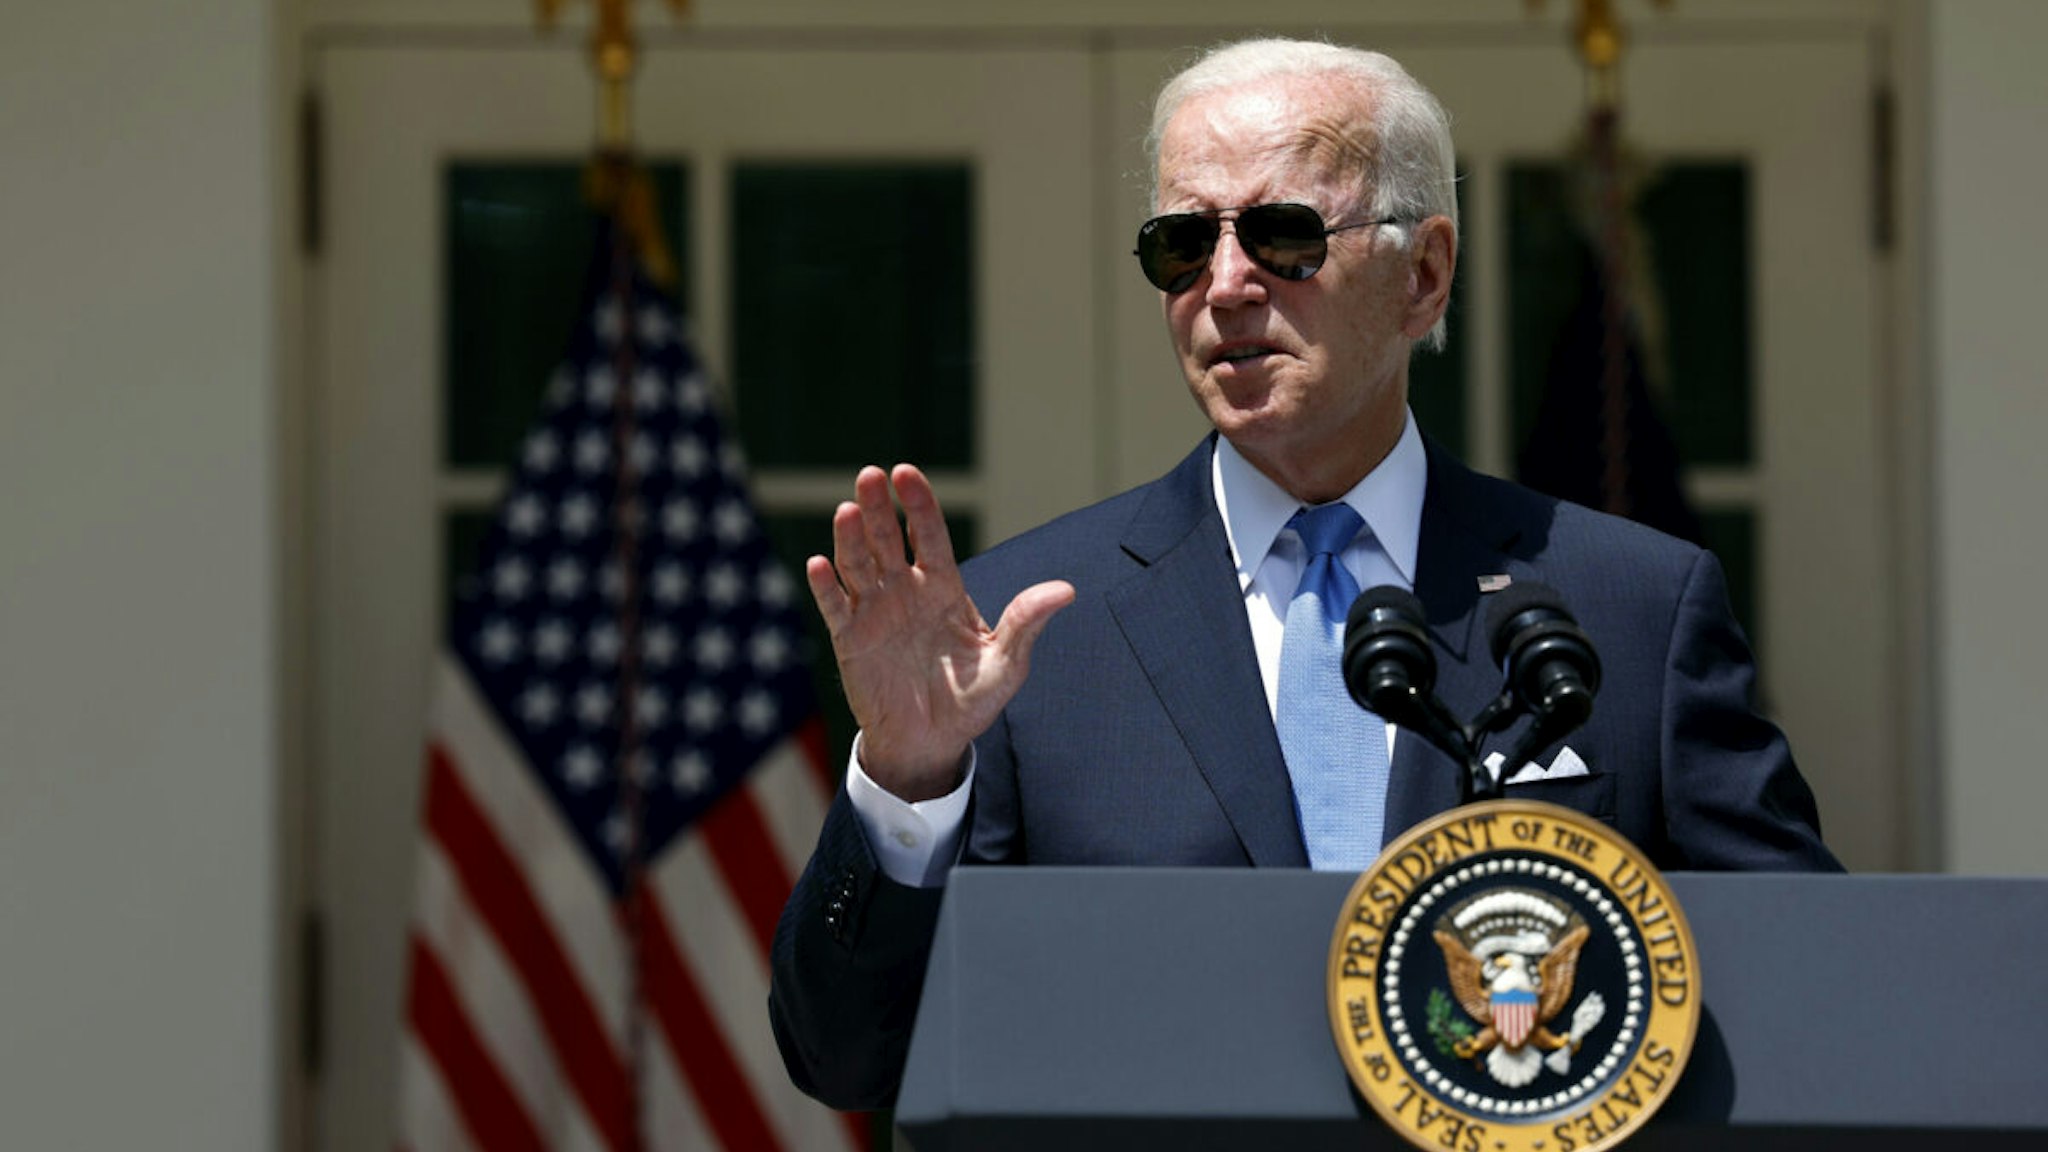 U.S. President Joe Biden delivers remarks on COVID-19 in the Rose Garden at the White House on July 27, 2022 in Washington, DC.